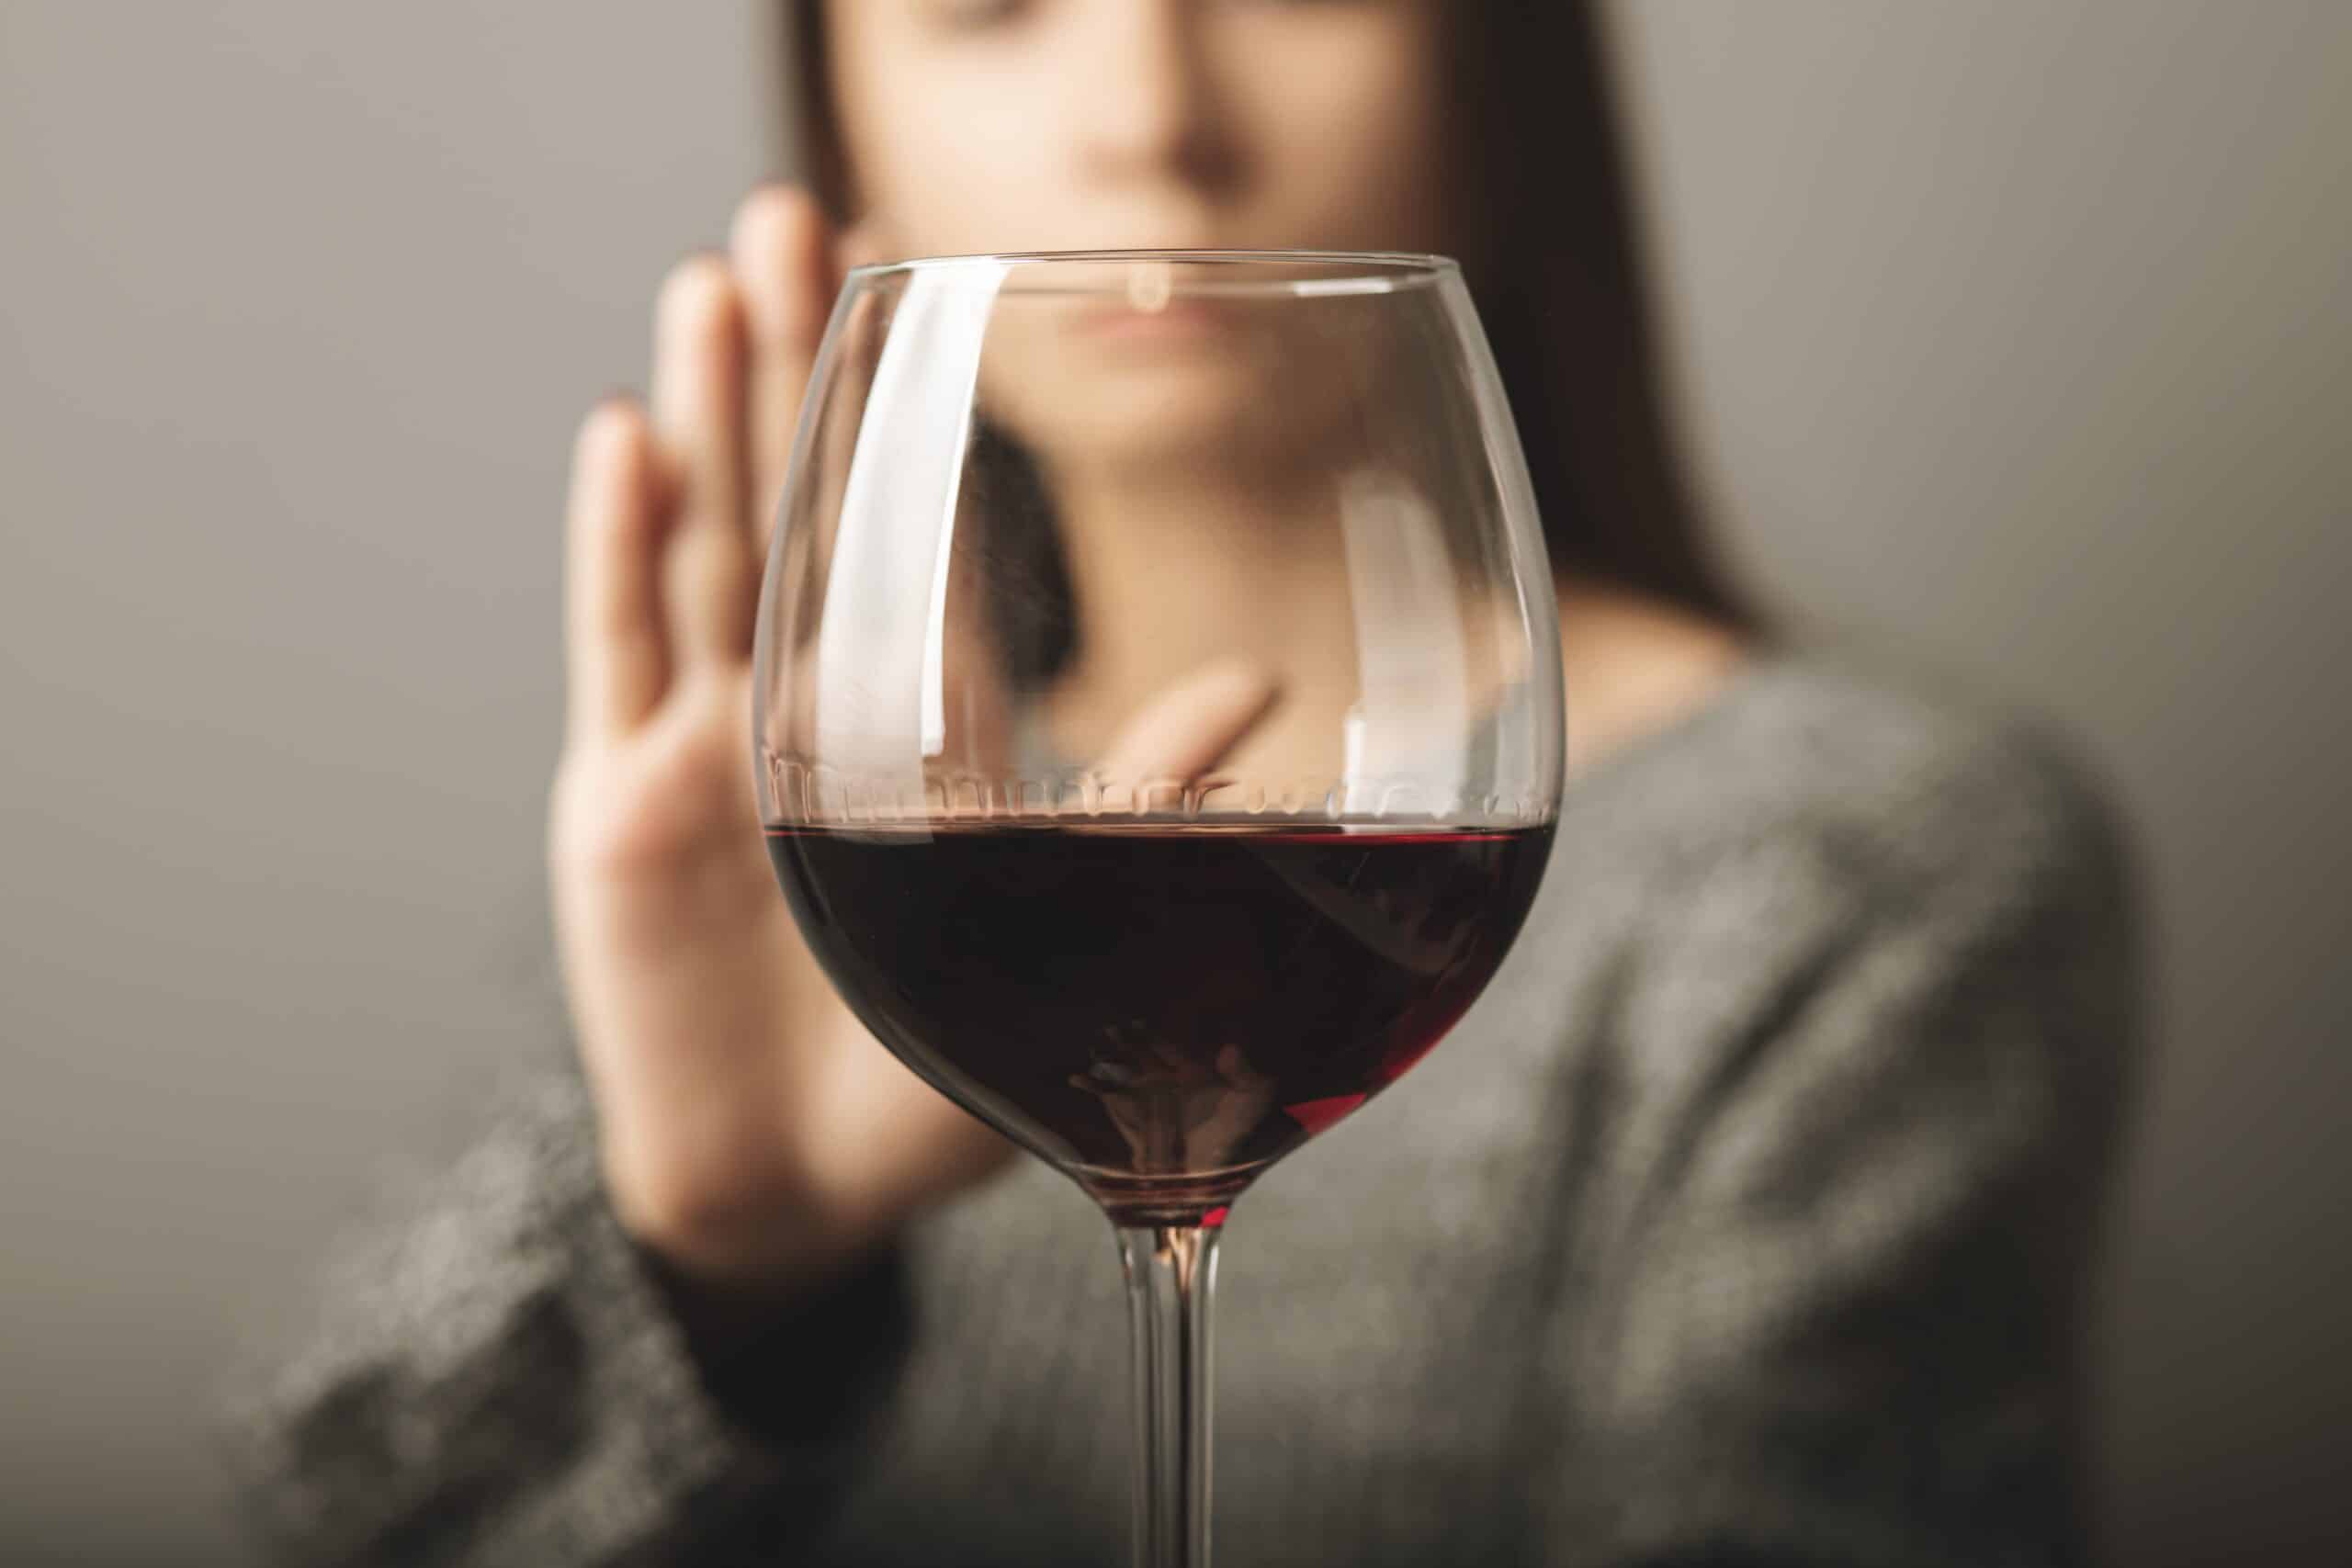 Signs of Alcoholism in Women